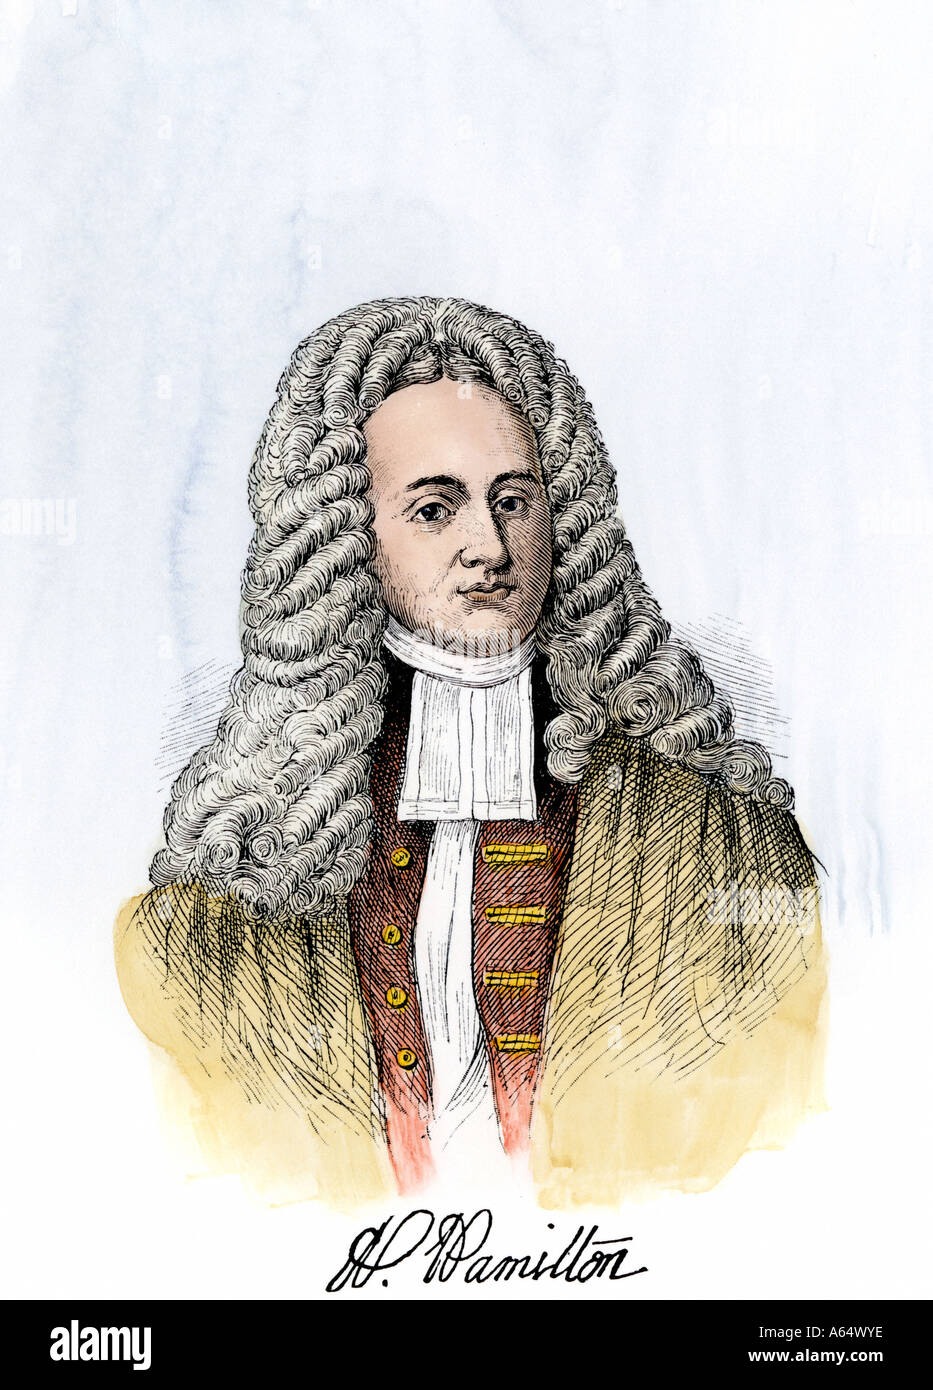 Andrew Hamilton lawyer who defended John Peter Zenger against British newspaper censorship 1735. Hand-colored woodcut Stock Photo